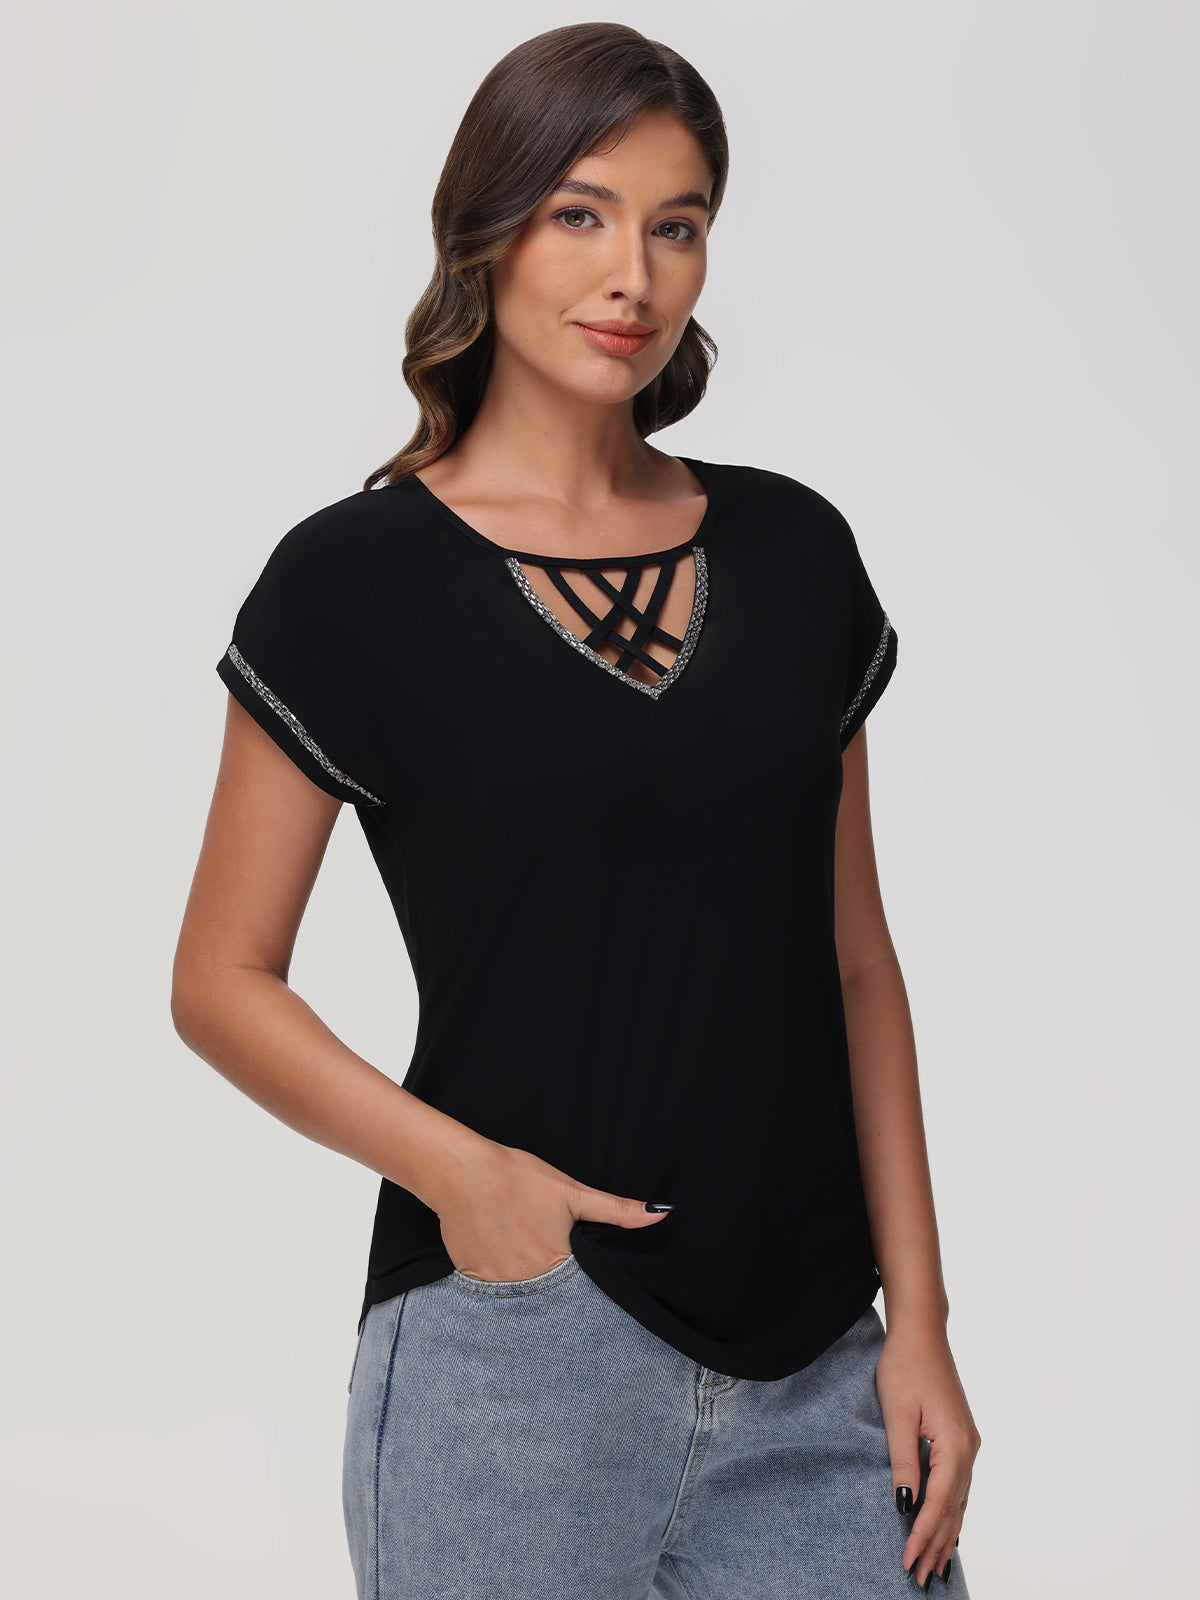 Lace Up Jeweled Dolman Top